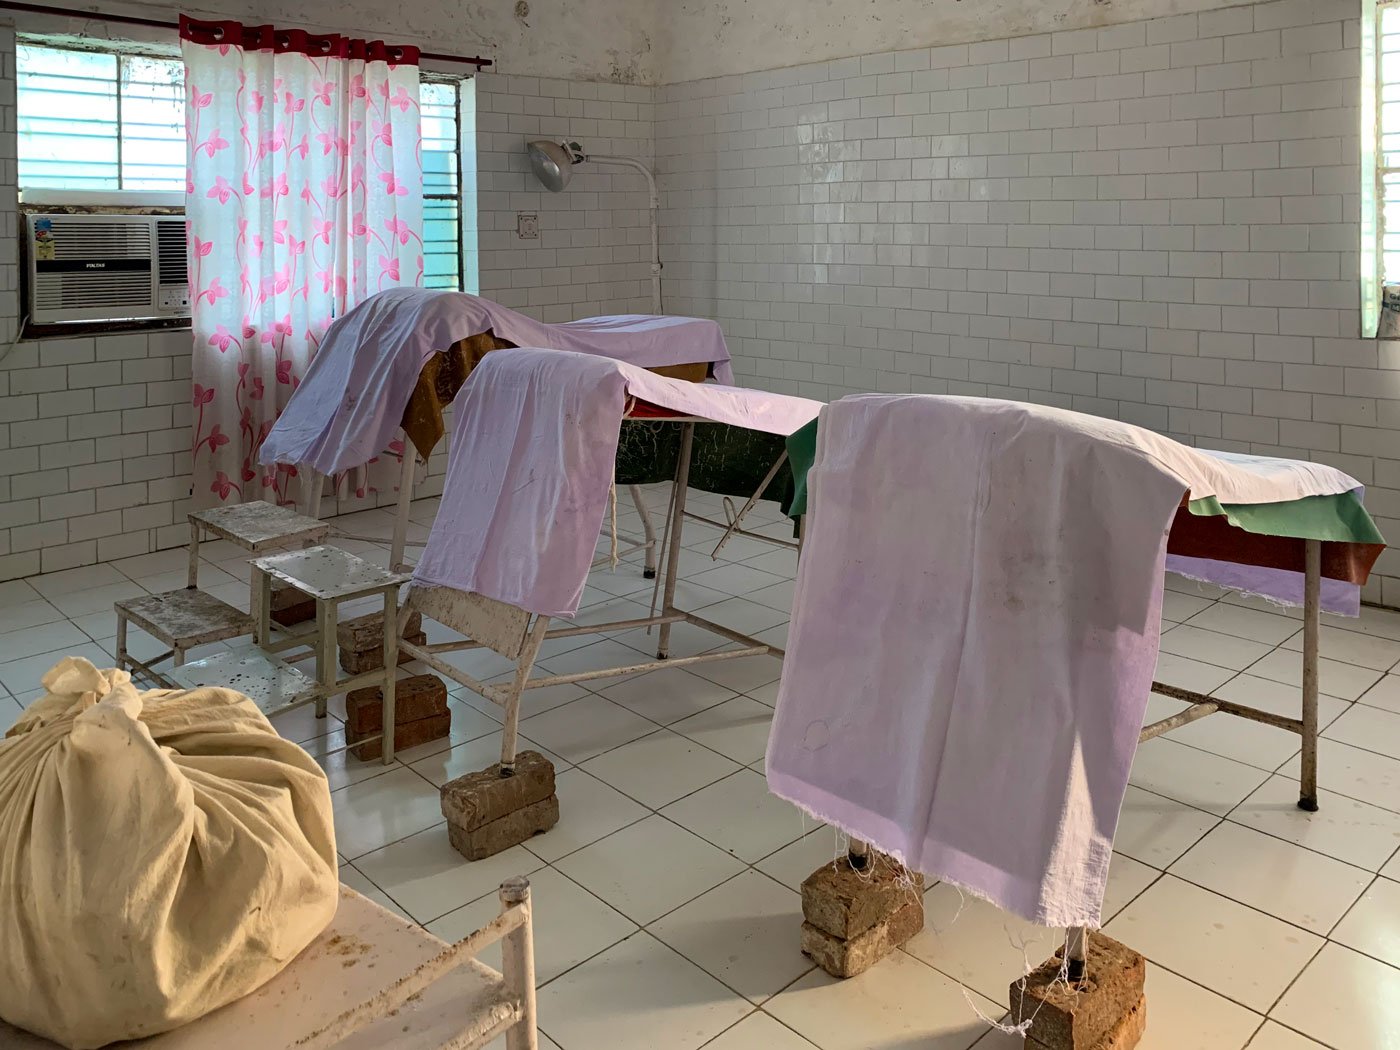 An 'operation theatre' at a CHC where the sterilisation procedures will take place, with 'operating tables' tilted at an angle with the support of bricks to help surgeons get easier access during surgery